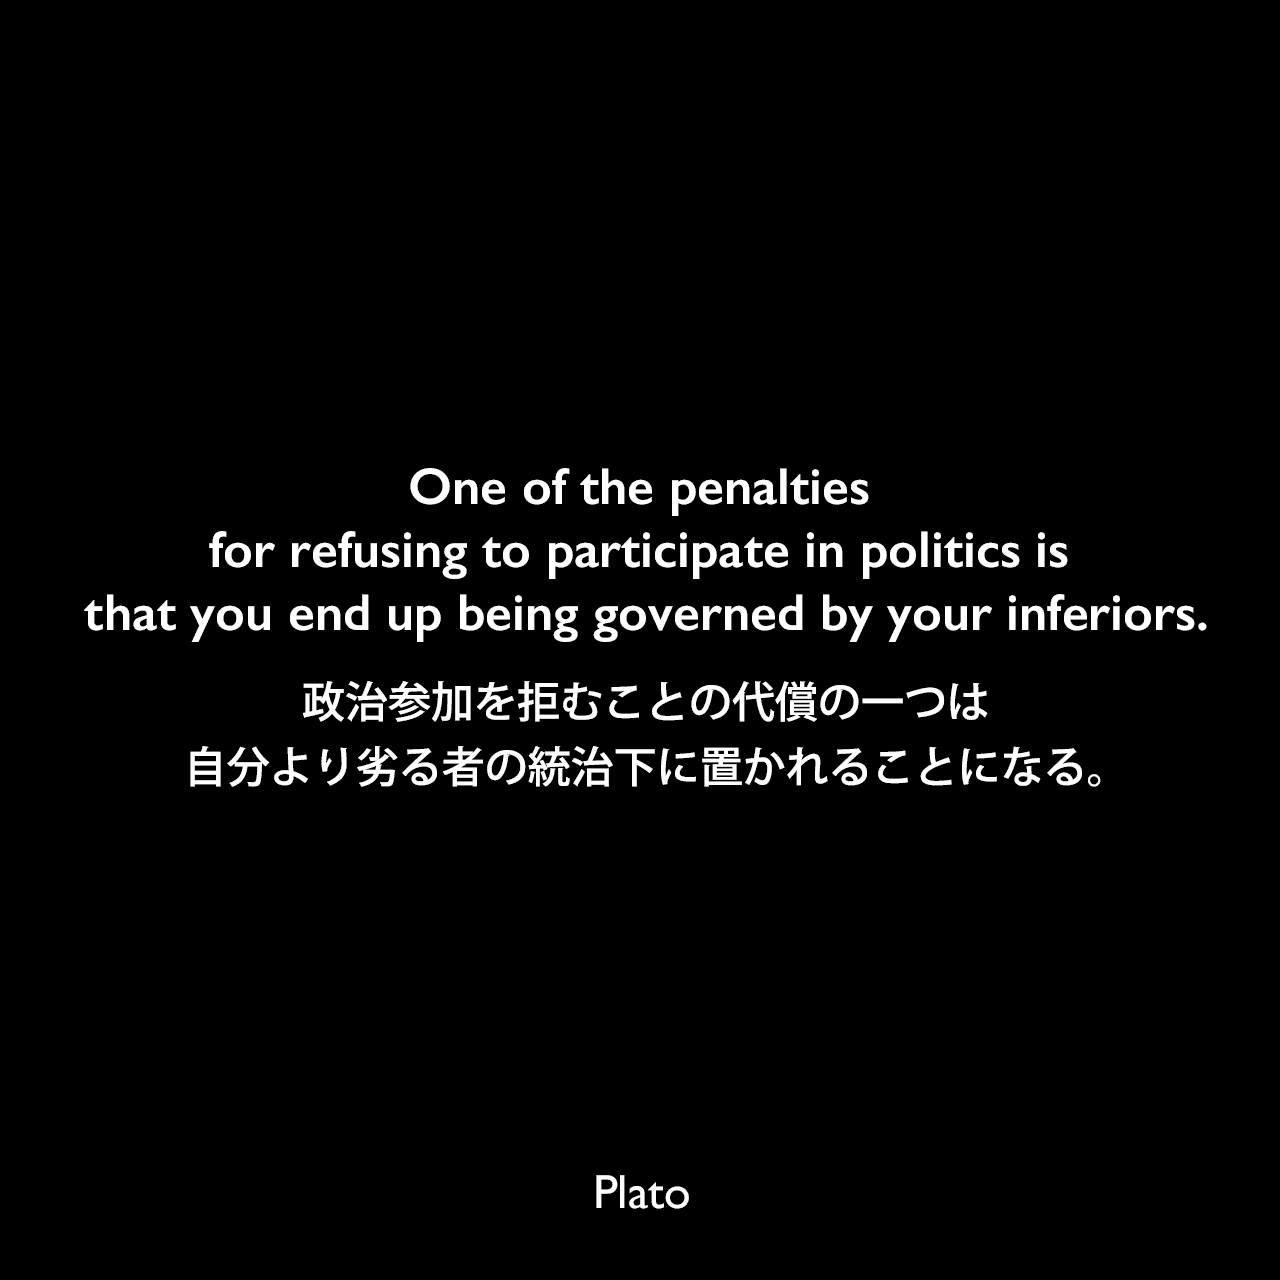 One of the penalties for refusing to participate in politics is that you end up being governed by your inferiors.政治参加を拒むことの代償の一つは、自分より劣る者の統治下に置かれることになる。Plato